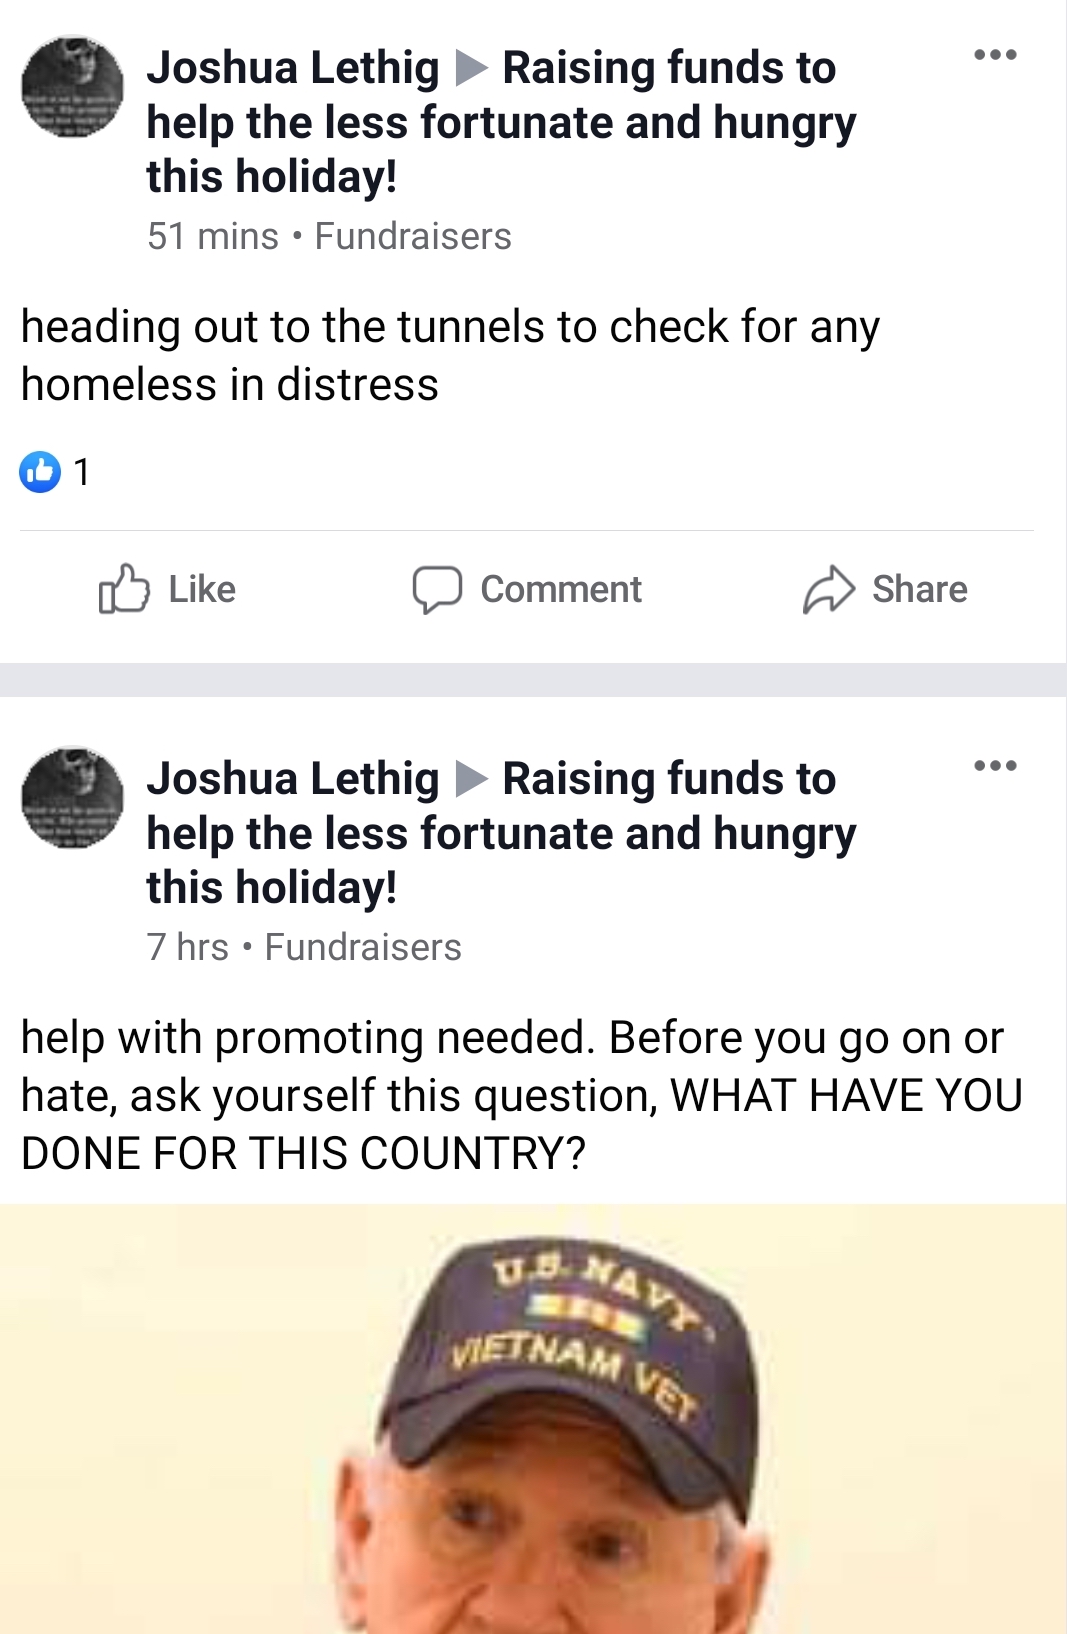 media - Joshua Lethig Raising funds to help the less fortunate and hungry this holiday! 51 mins. Fundraisers heading out to the tunnels to check for any homeless in distress 1 Comment Joshua Lethig Raising funds to help the less fortunate and hungry this 